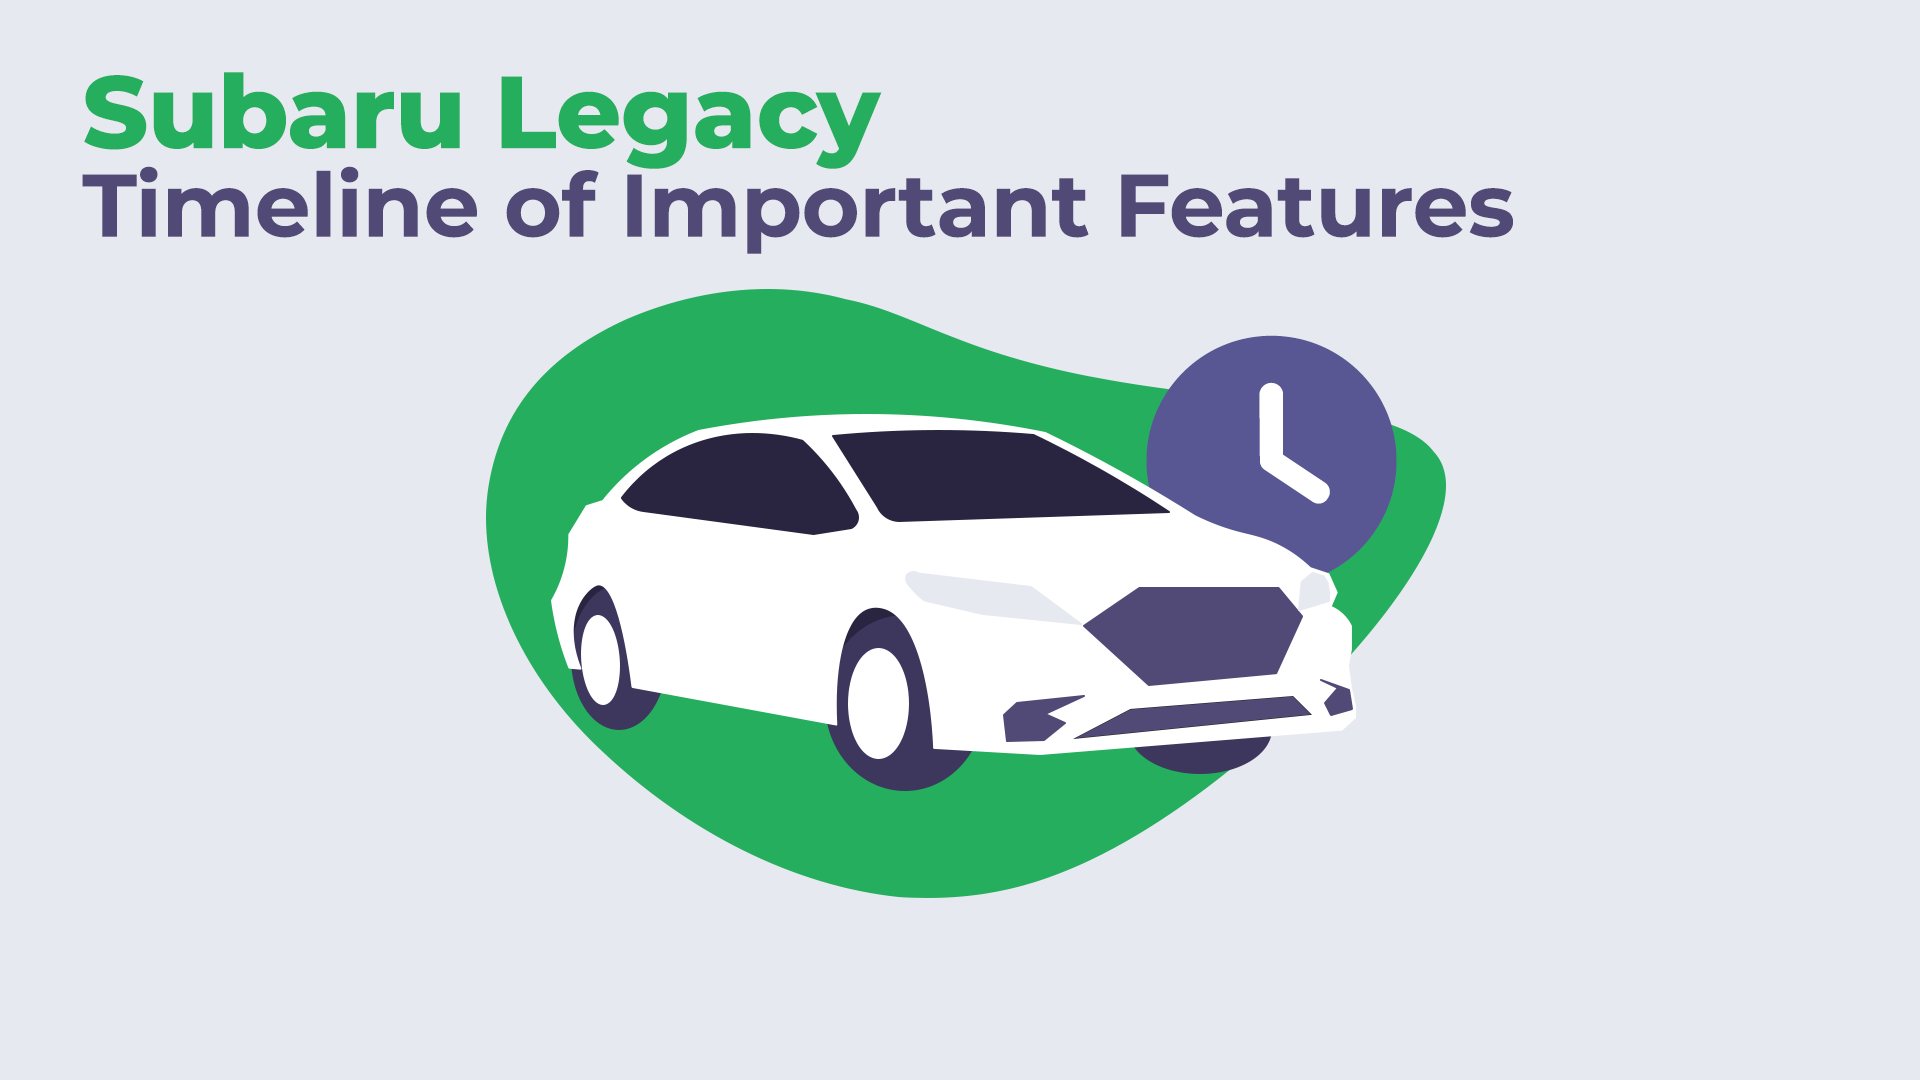 Subaru Legacy's Timeline of Important Features